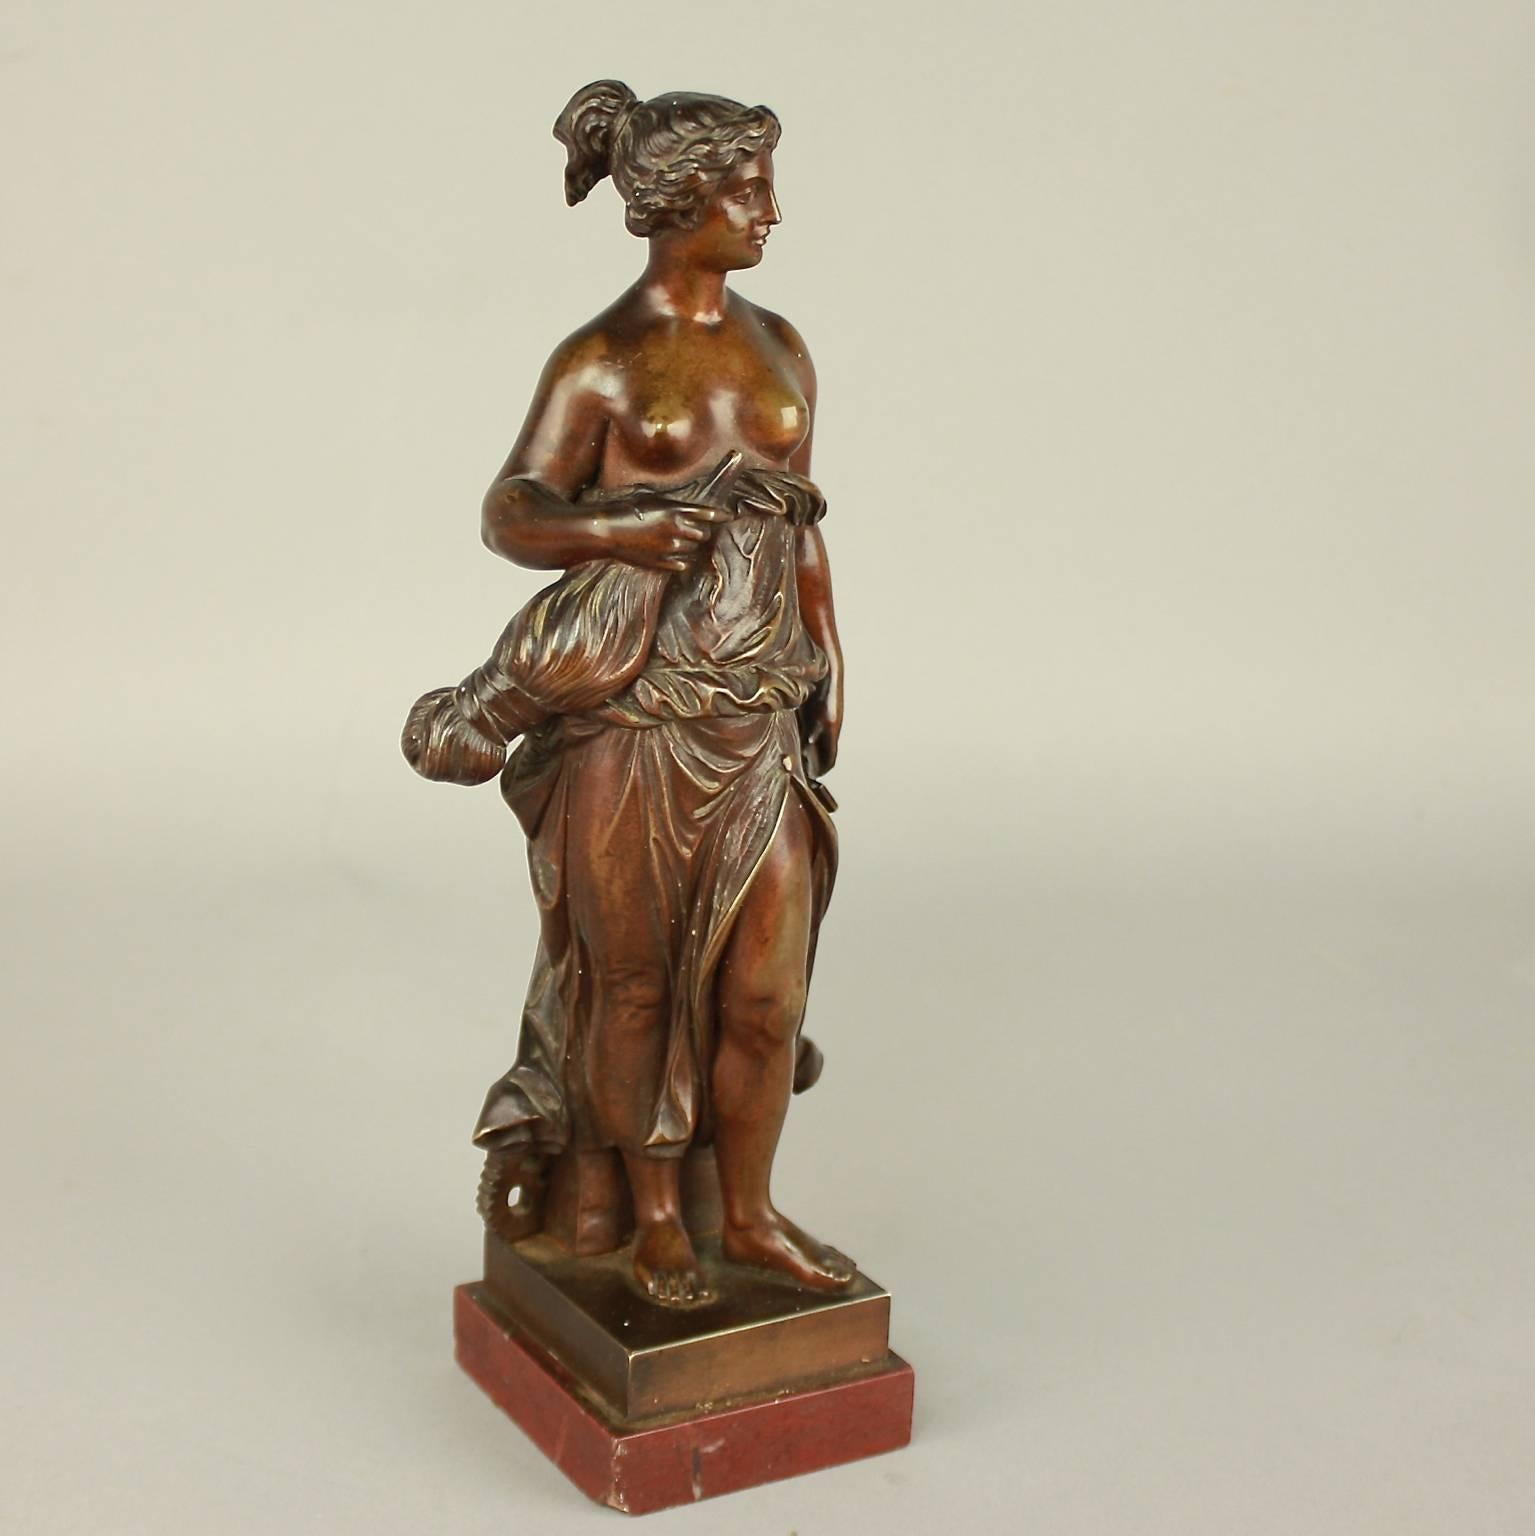 Small 19th century patinated female bronze figure of the allegory of manufacture featuring a spindle, a hammer and a gear-wheel. The female figure holding up her light tunic and looking confident ahead. A delightful and decorative sculpture